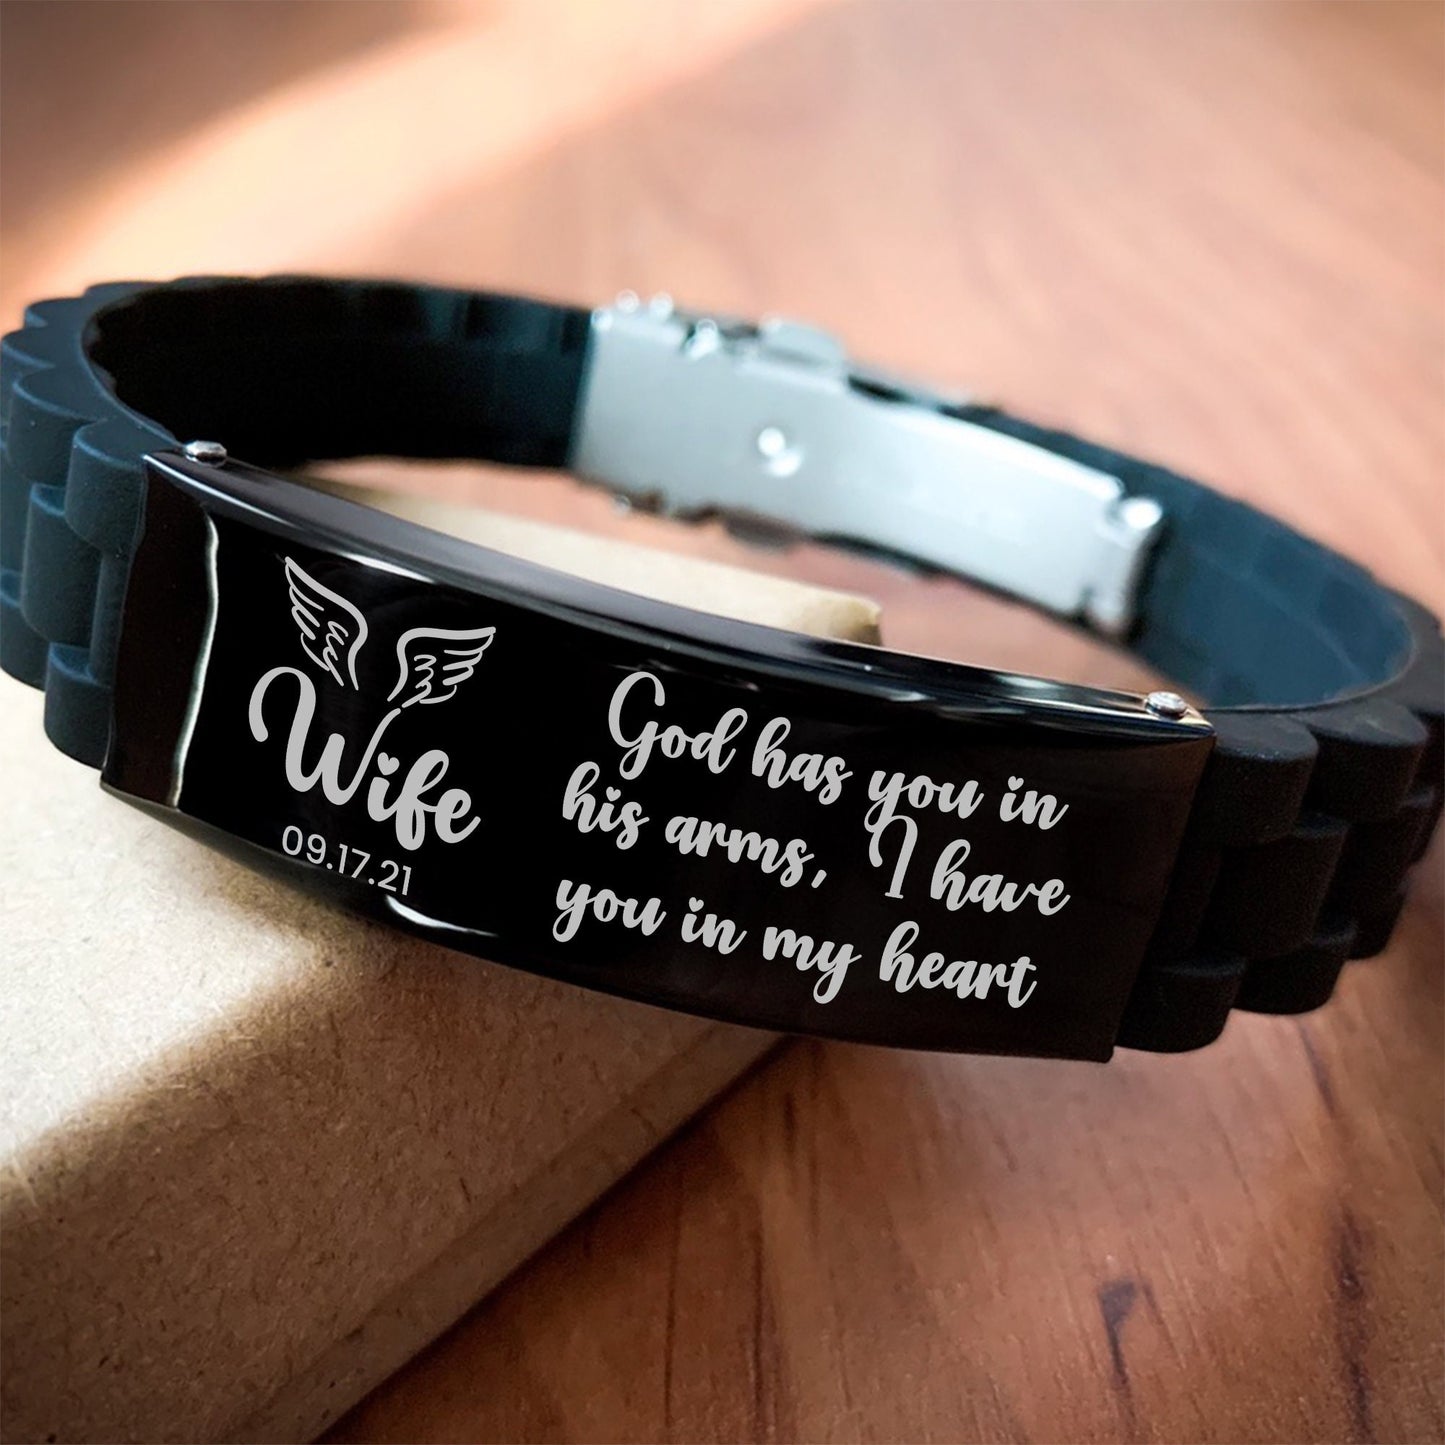 God Has You In His Arms Bracelet, Personalized Wife Memorial Gift, In Memory Gift, Silicone Bracelet, Loss Of Wife, Sympathy Gifts